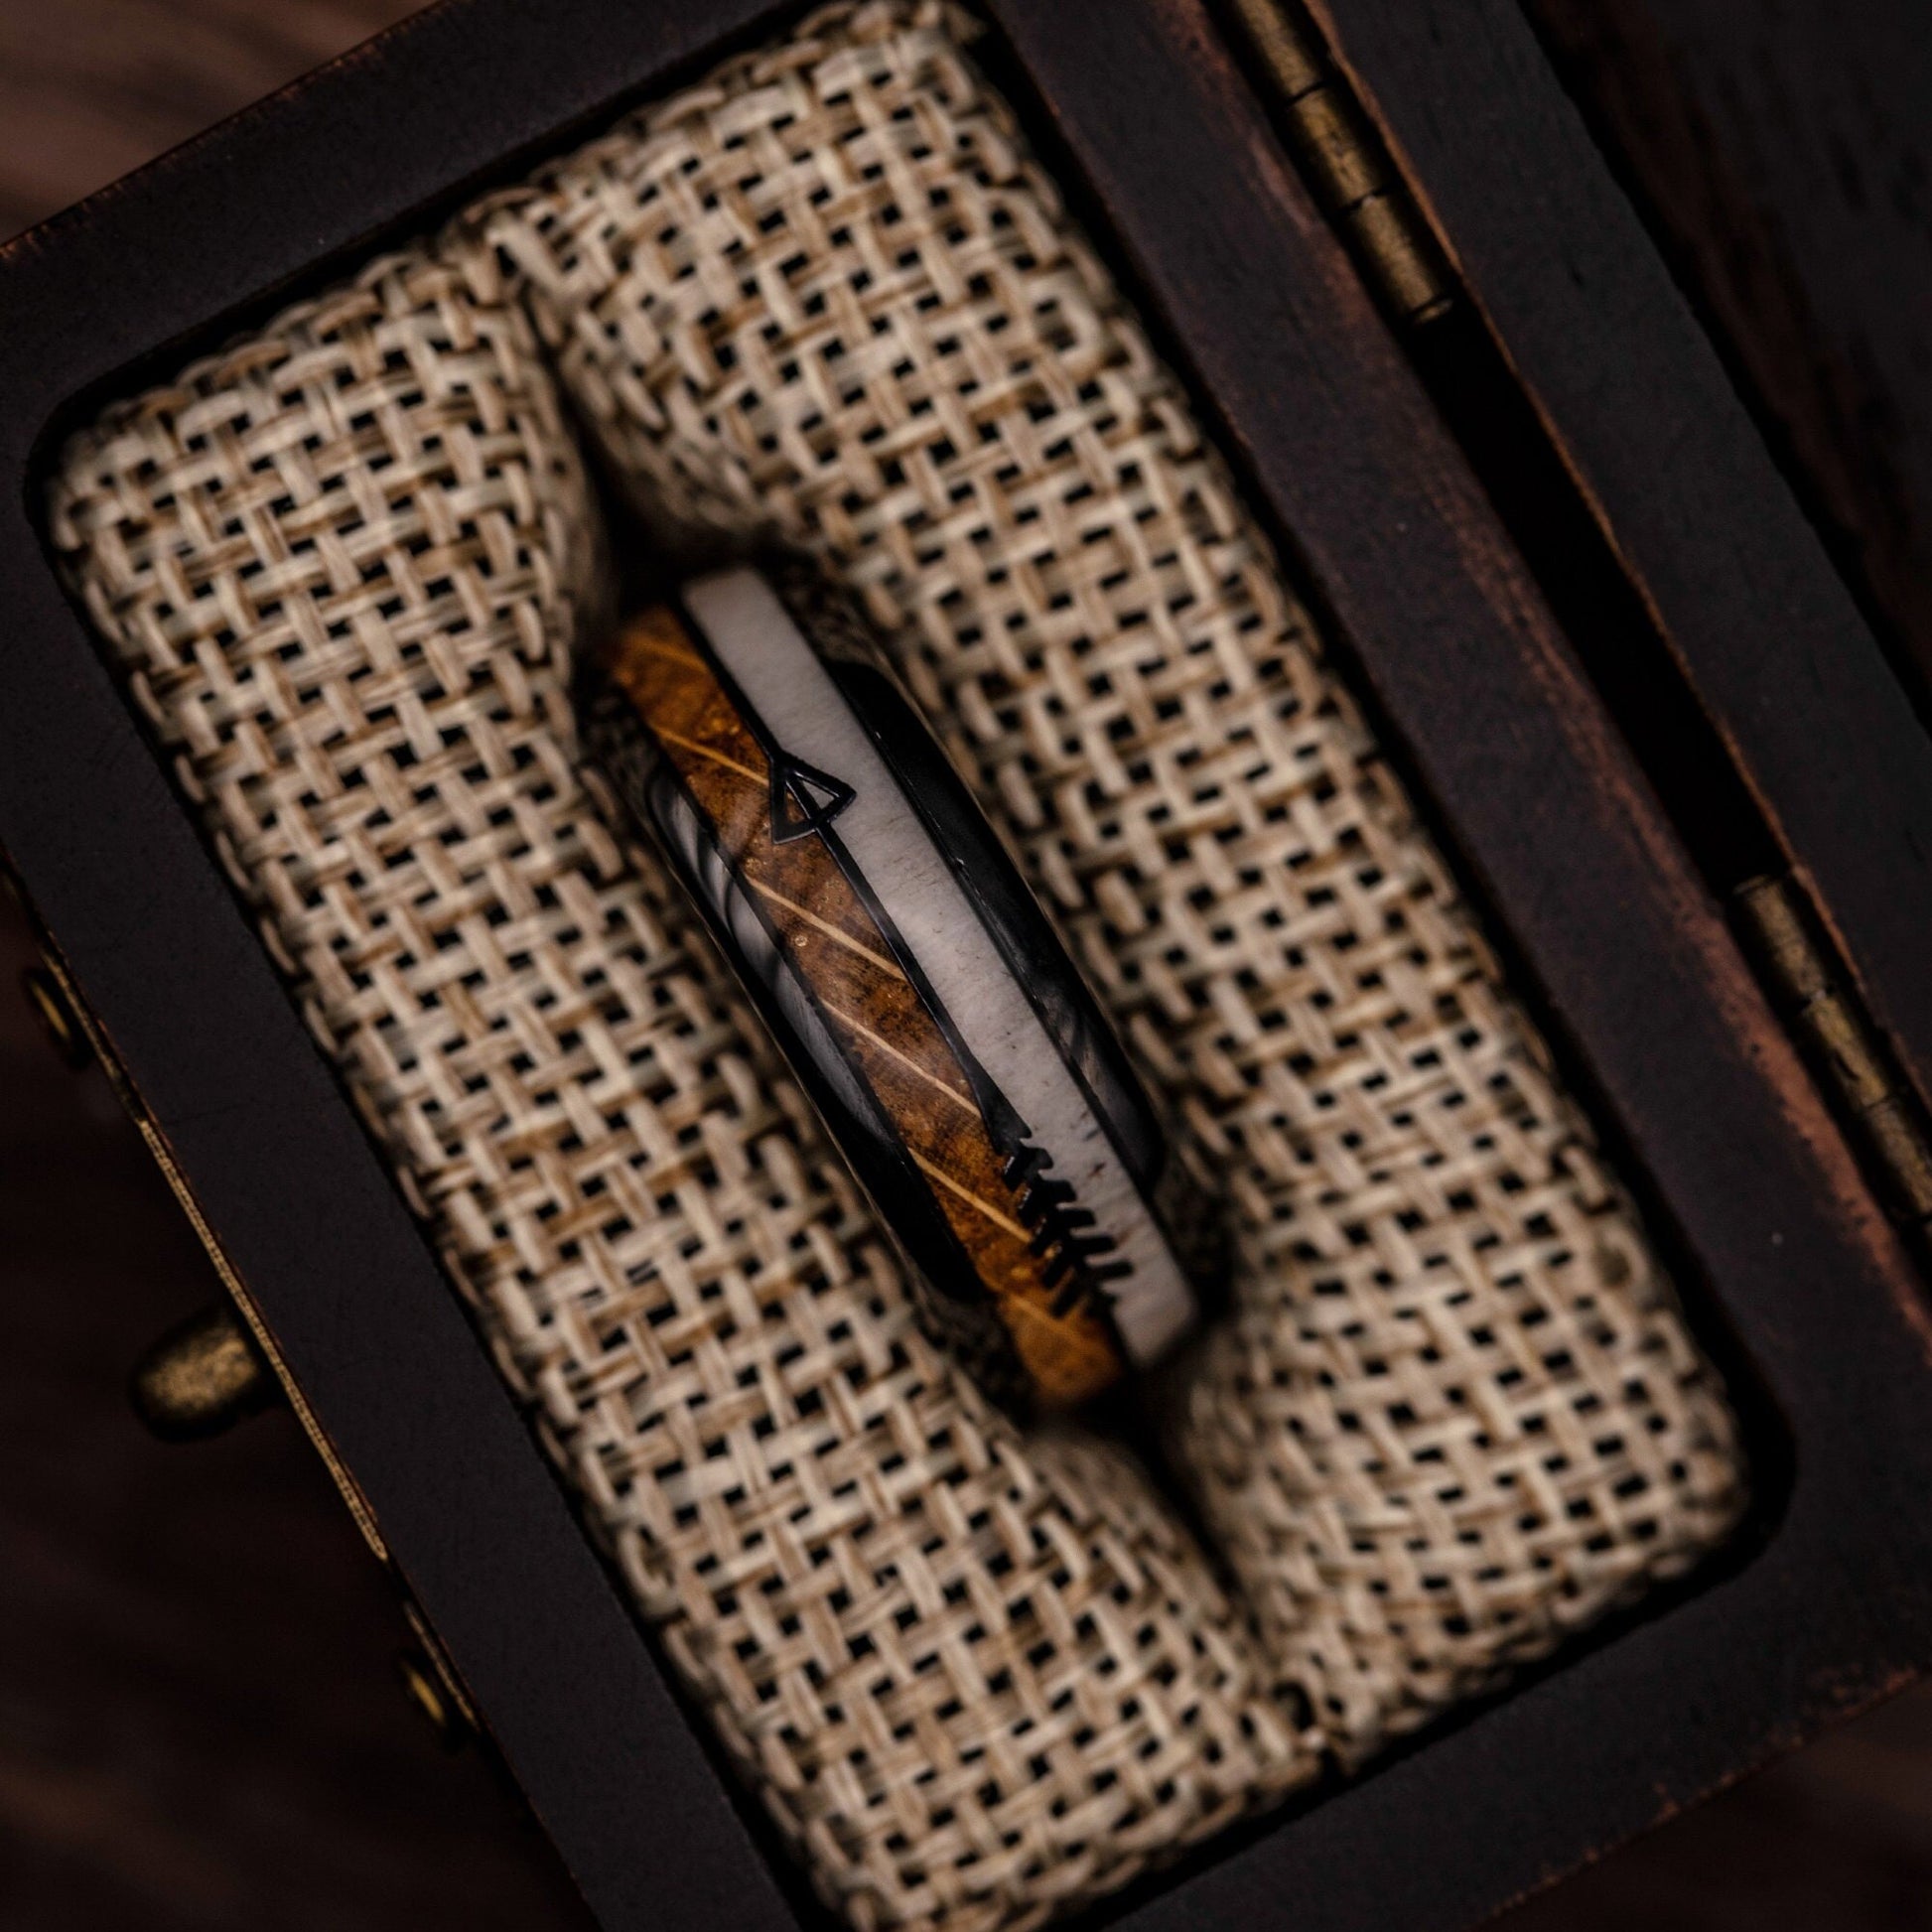 Handsome men's engagement ring with 8mm width, featuring deer antler and wood detailing.